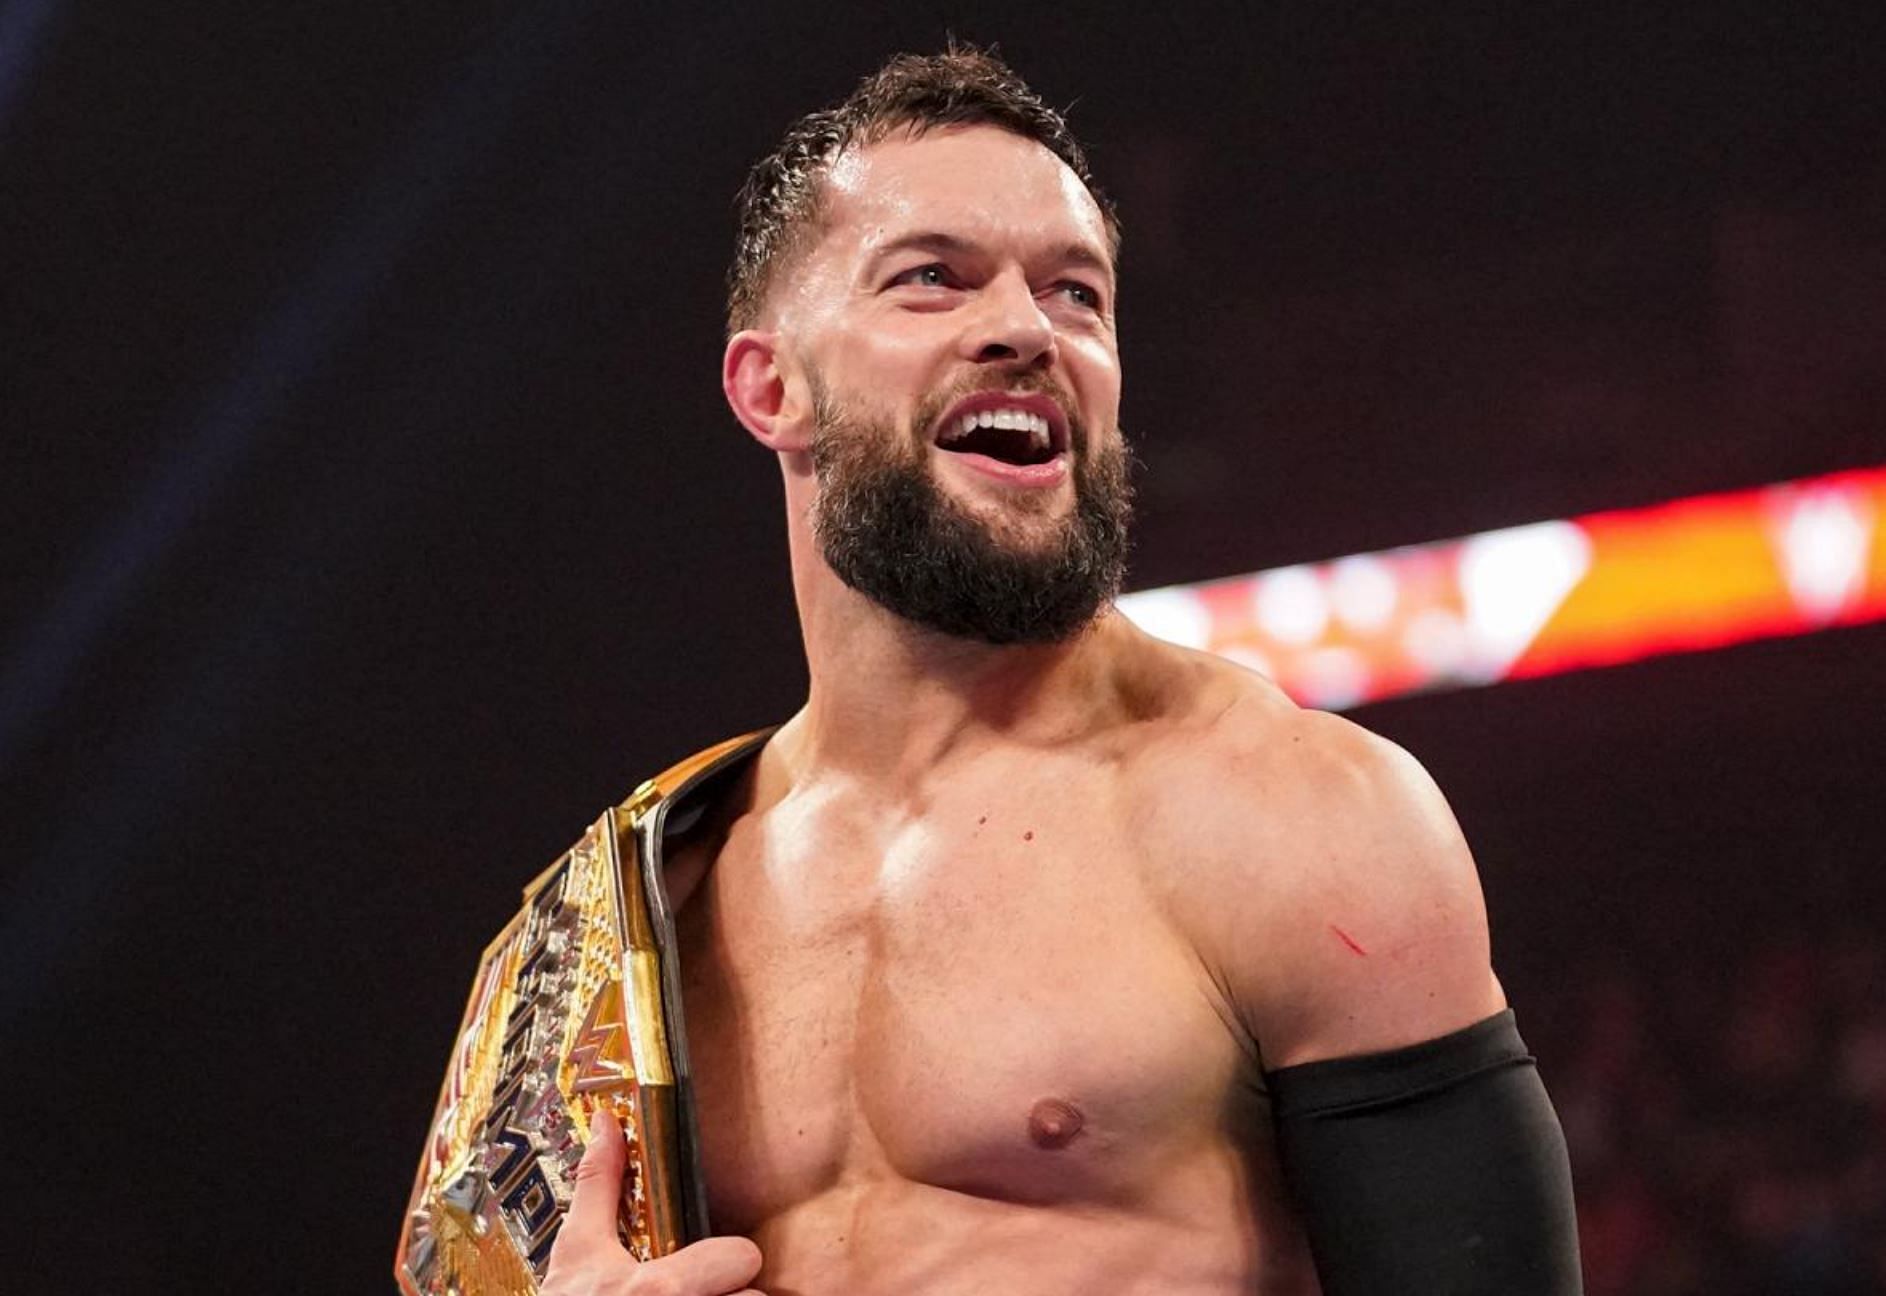 Finn Balor dethroned Damian Priest to win the US title